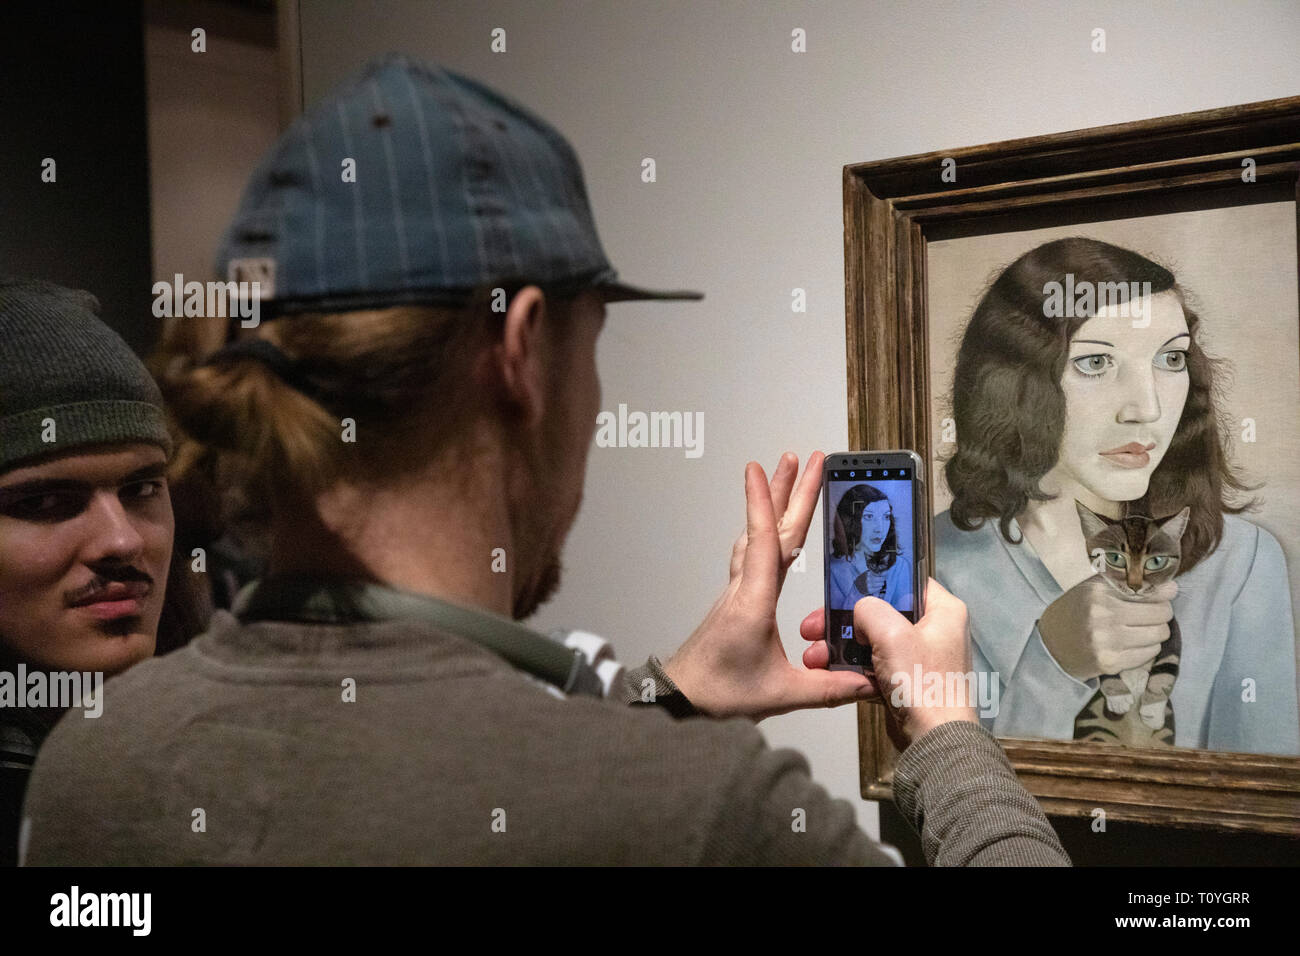 Moscow, Russia. 22nd Mar 2019. Visitor make a photo of the painting 'Girl with a Kitten'' of Lucian Freud in the Pushkin State Museum of Fine Arts during the exhibition “Francis Bacon, Lucian Freud, and the School of London.” in Moscow, Russia. The artworks provided by the Tate Gallery, London. Stock Photo